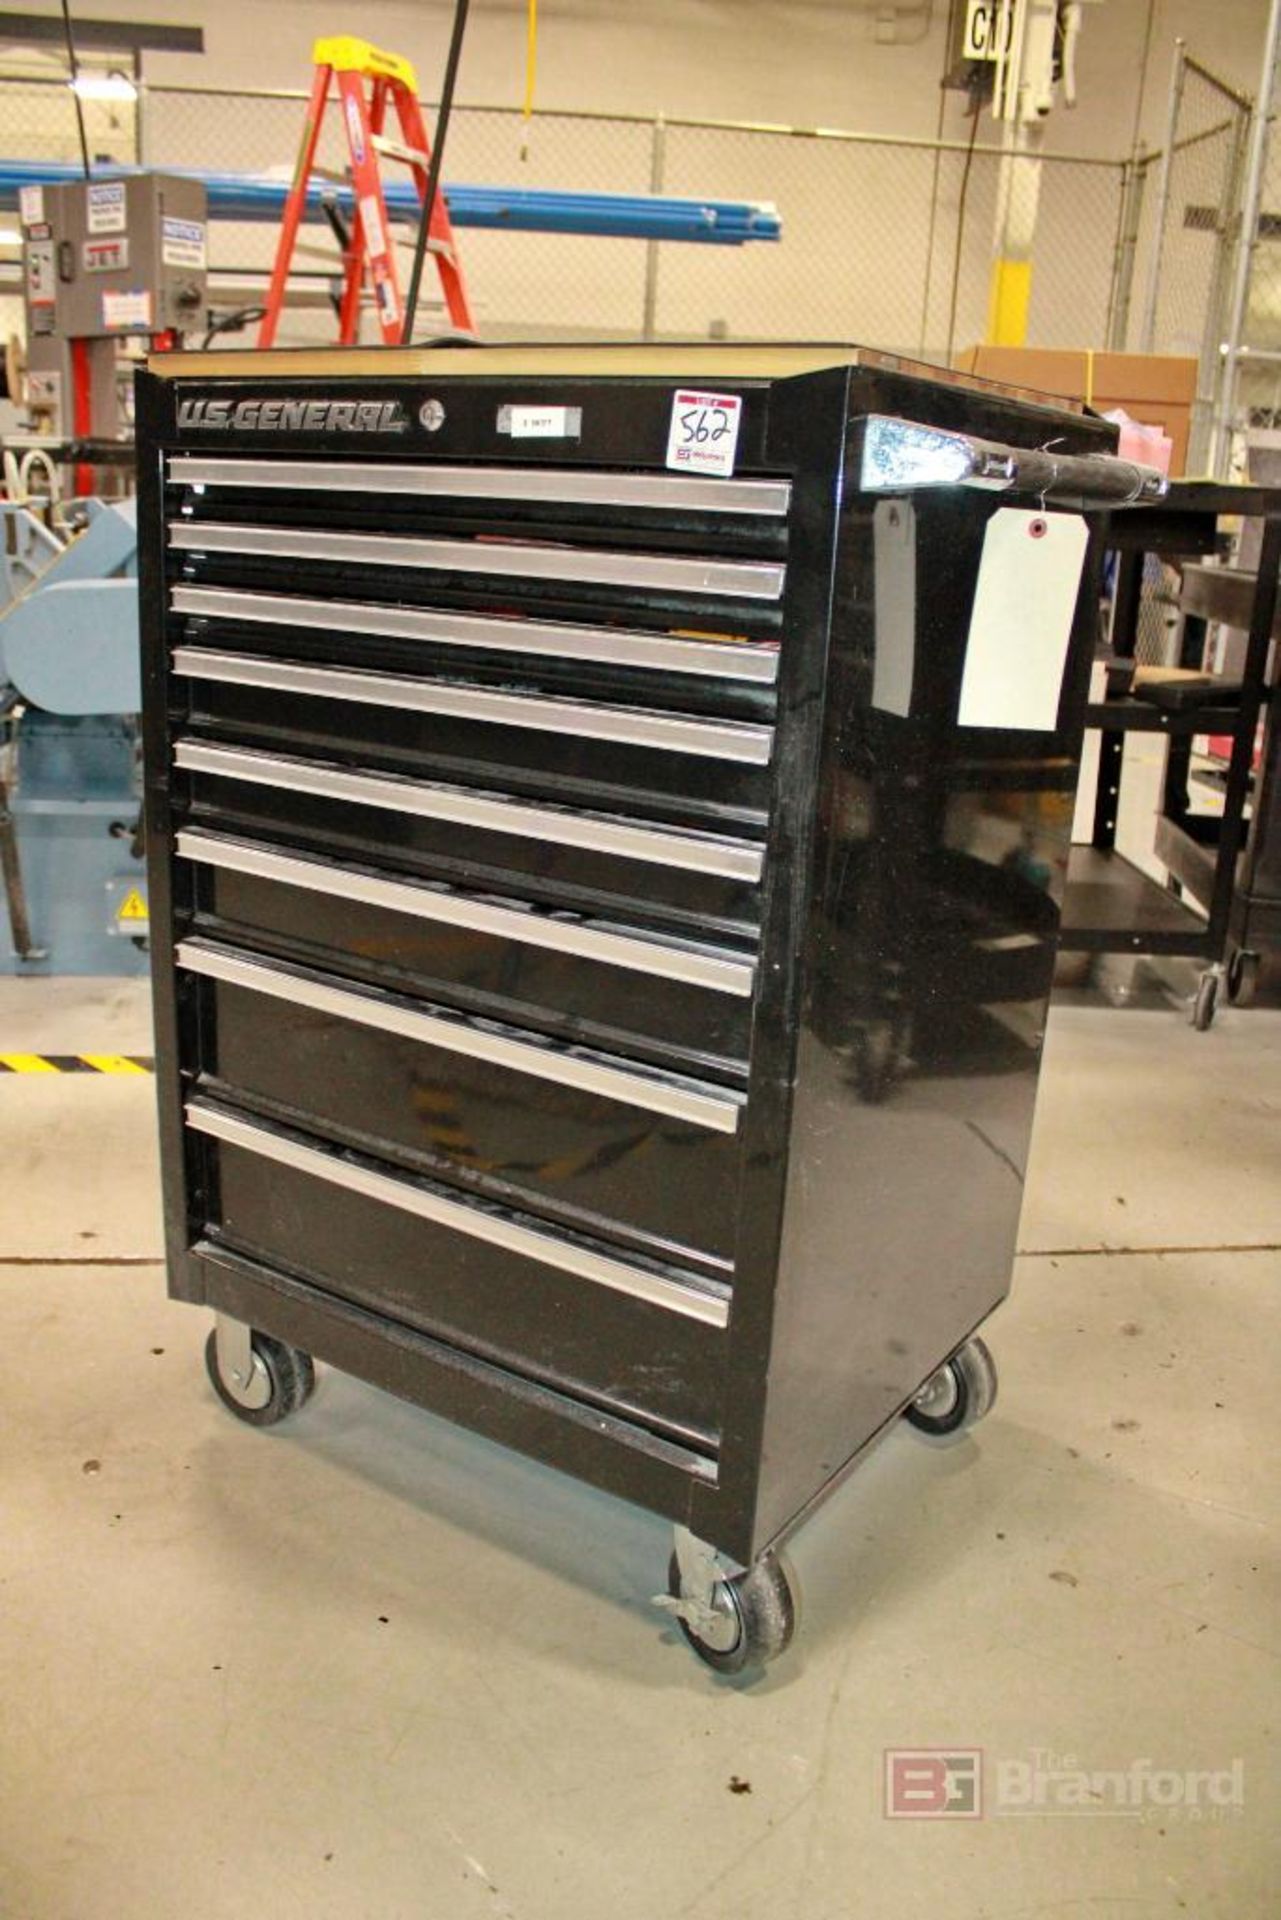 U.S. General 8-Drawer Rolling Tool Chest